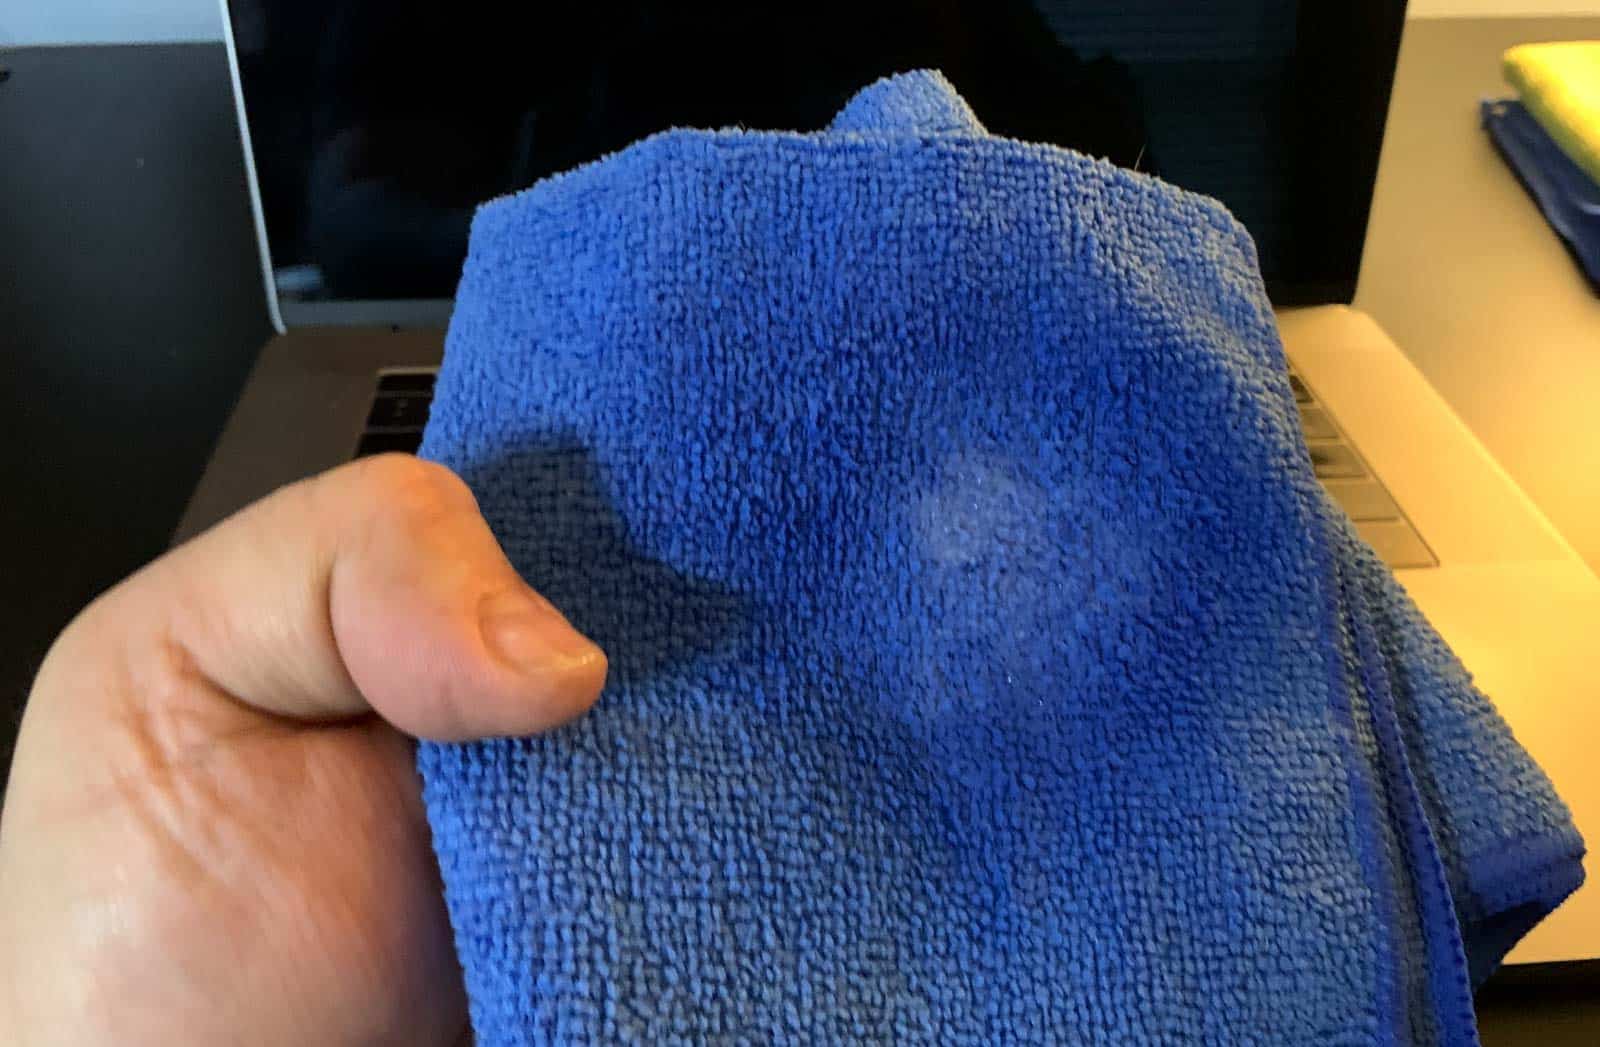 Use a damp microfiber cloth to wipe down your Macbook keyboard